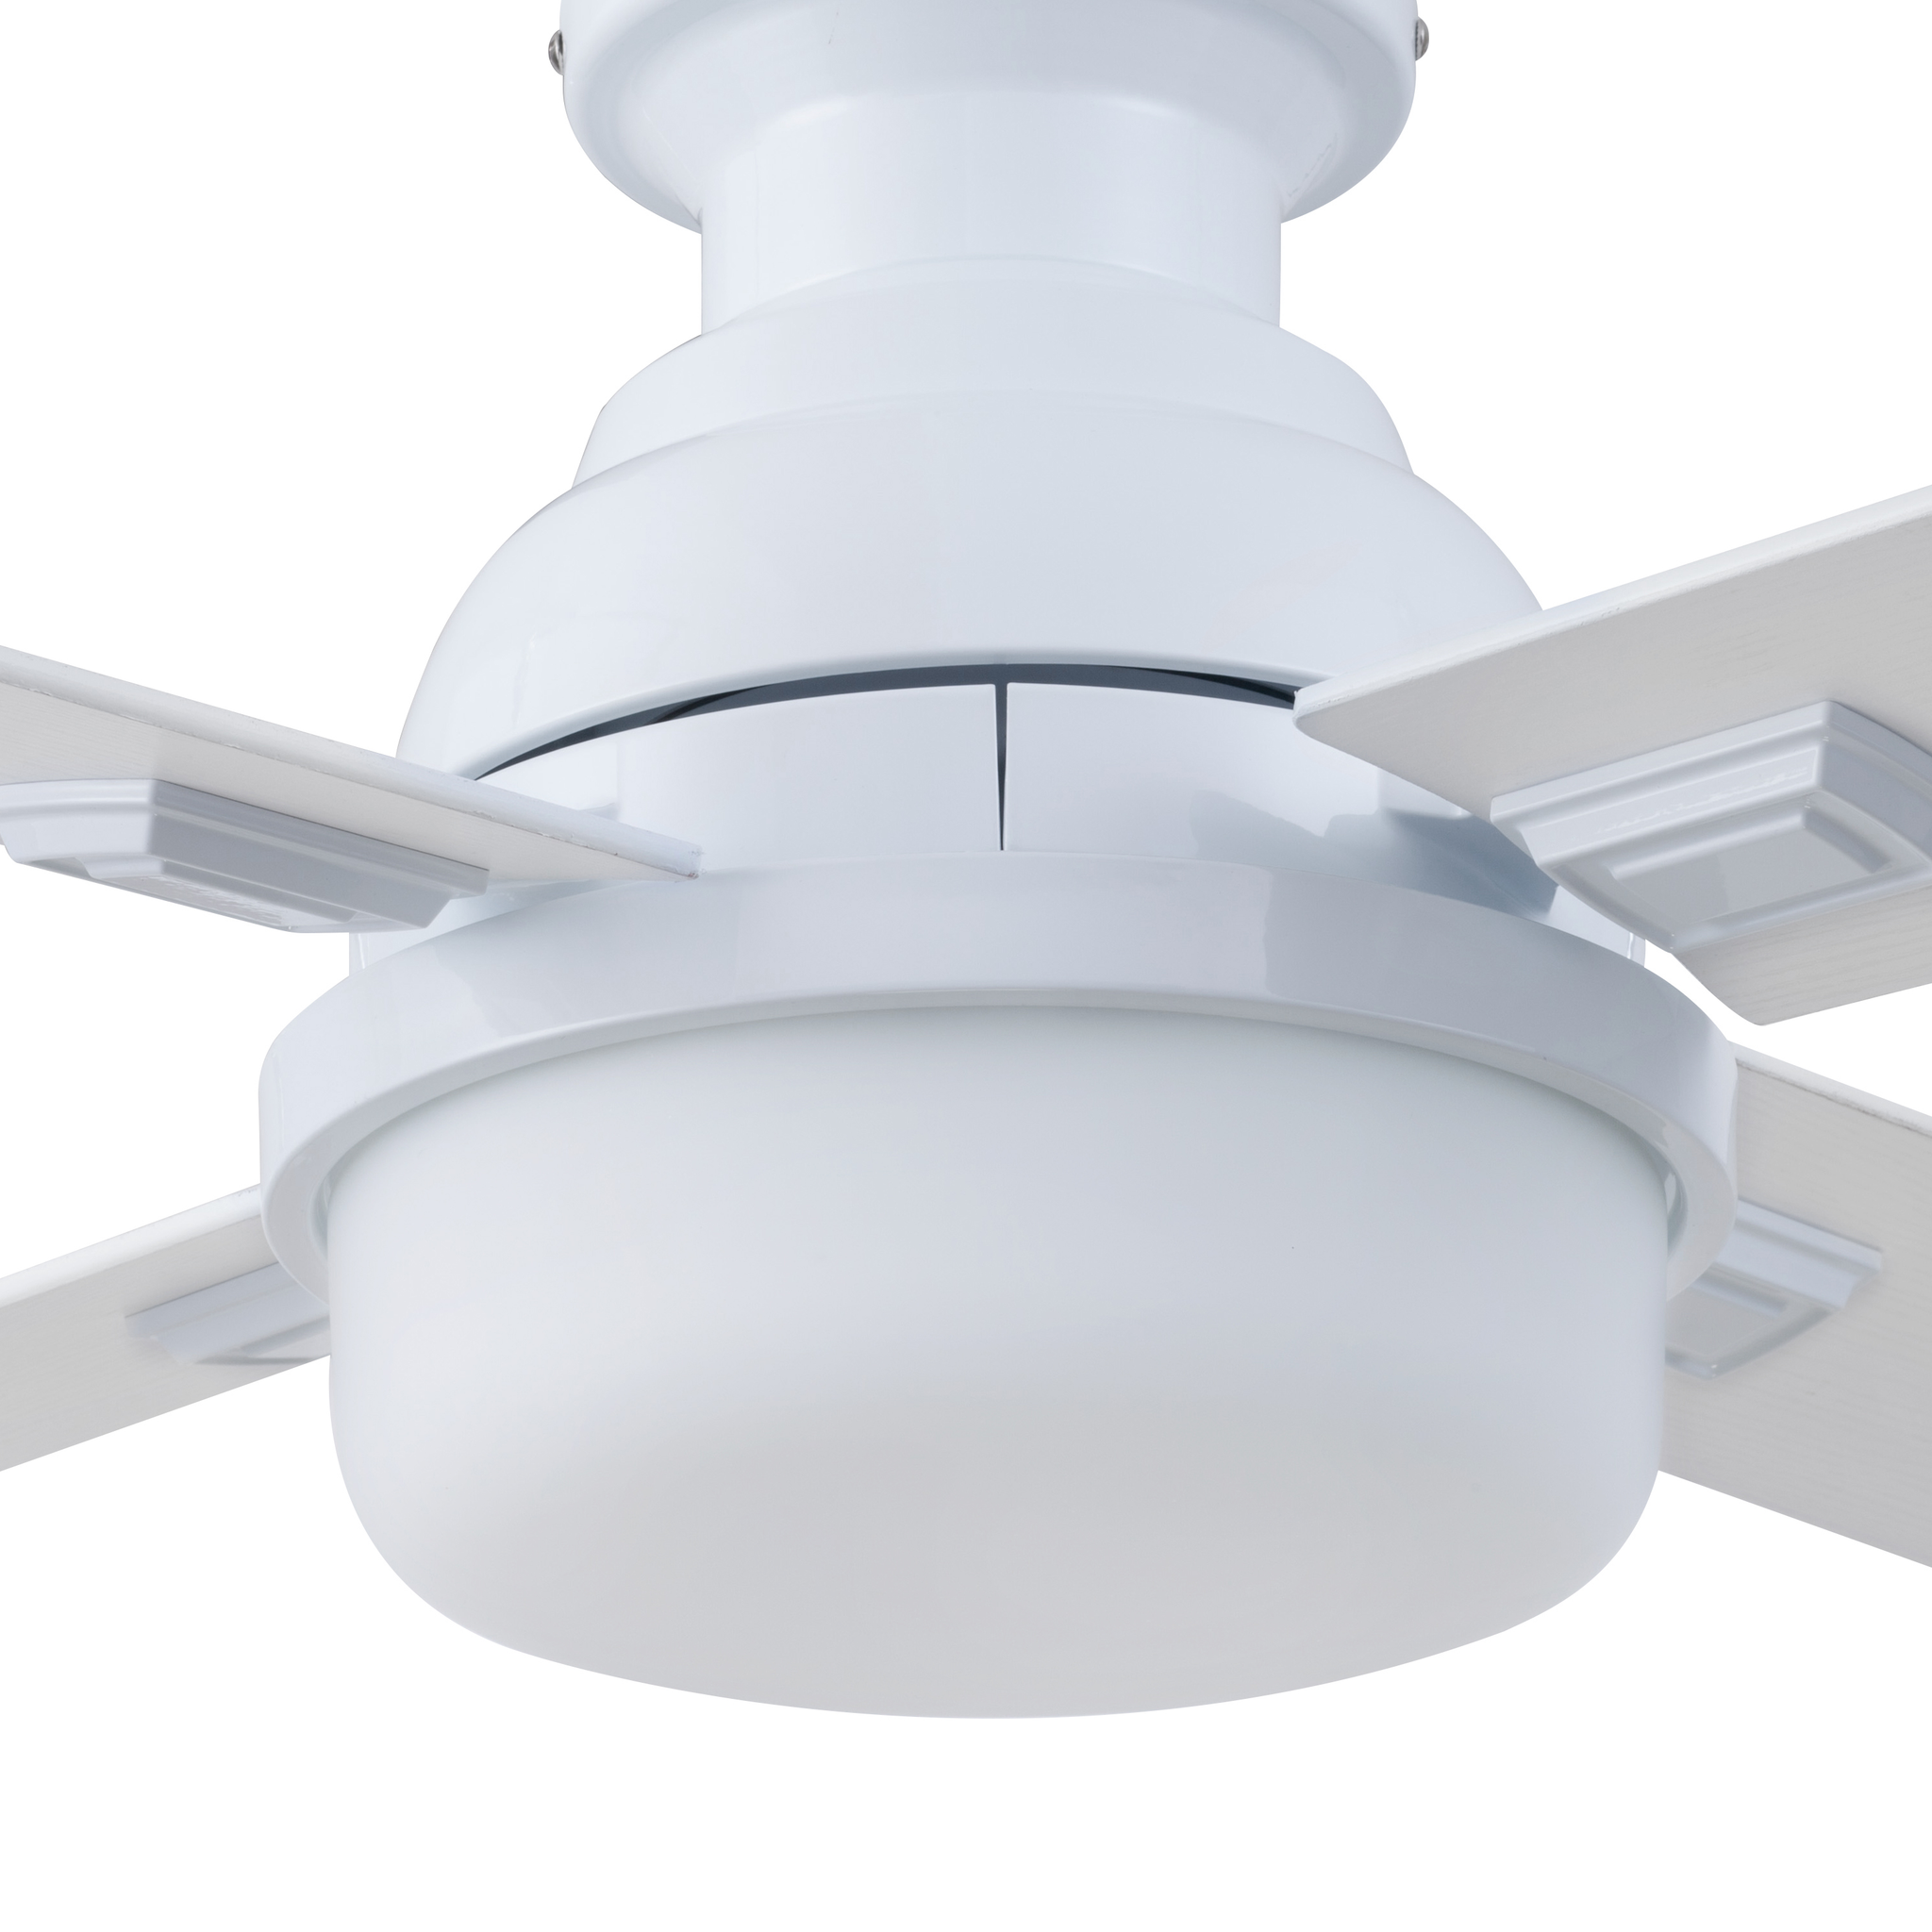 52 Inch Kyrra, White, Remote Control, Ceiling Fan by Prominence Home